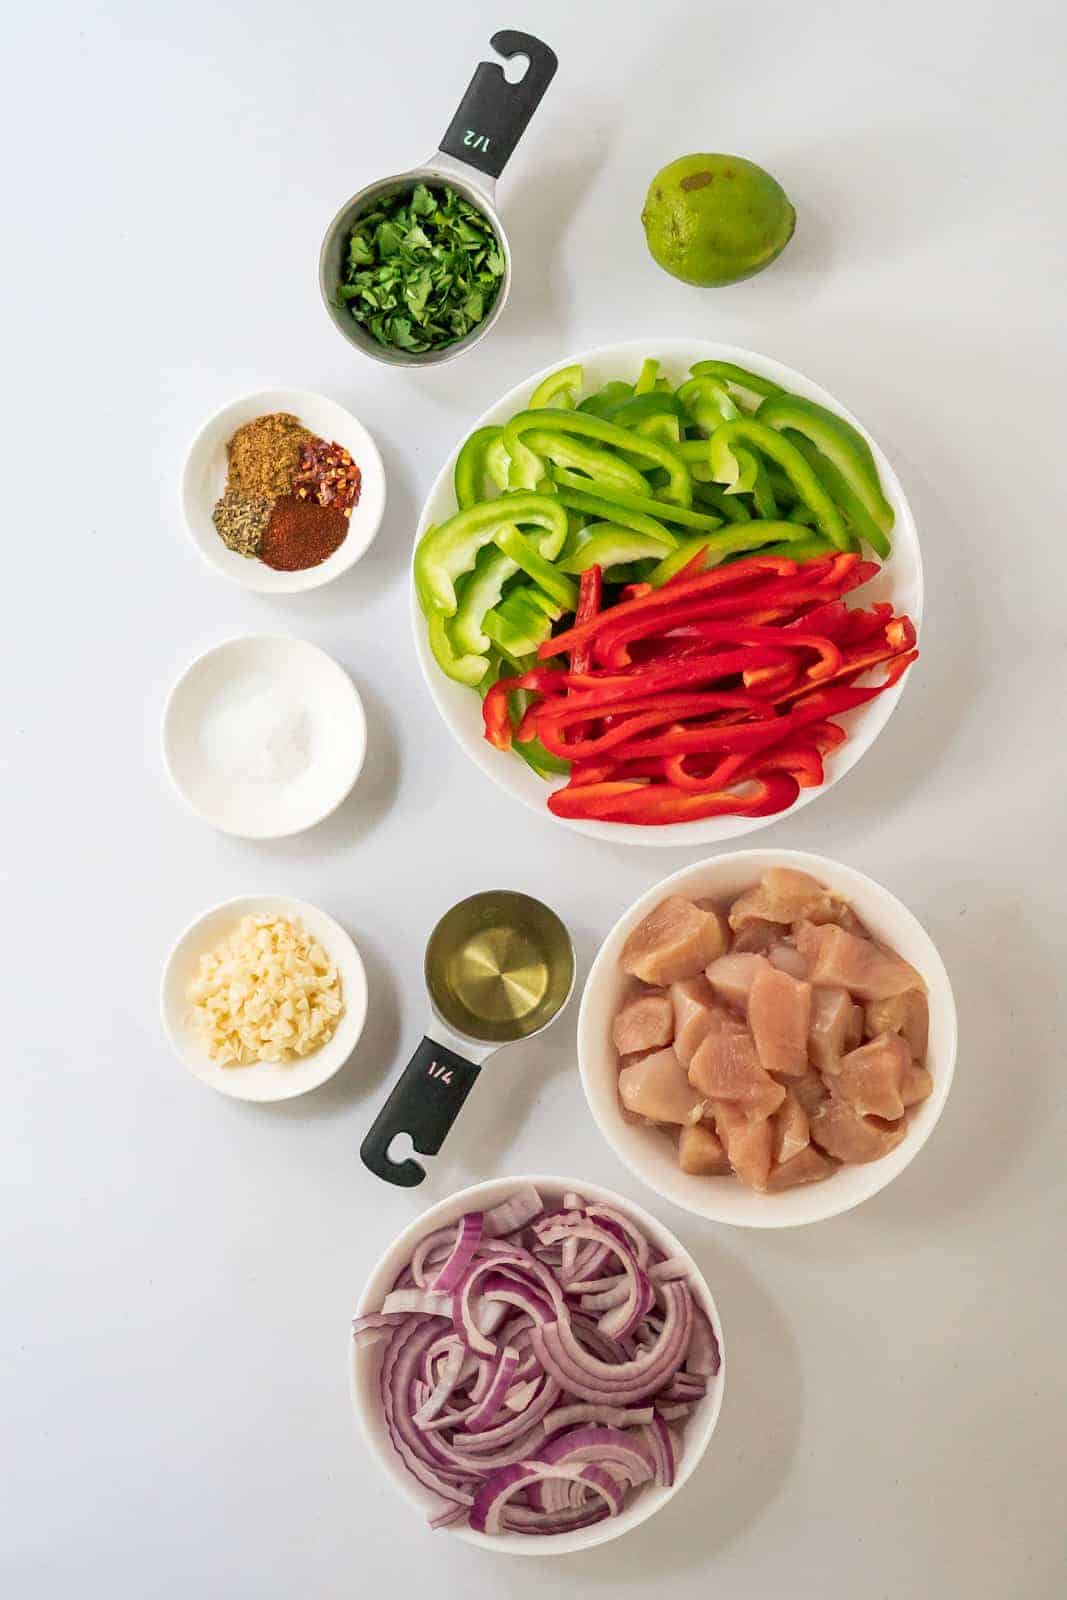 Overhead view of the 8 main ingredients plus 5 common spices needed to make this recipe.